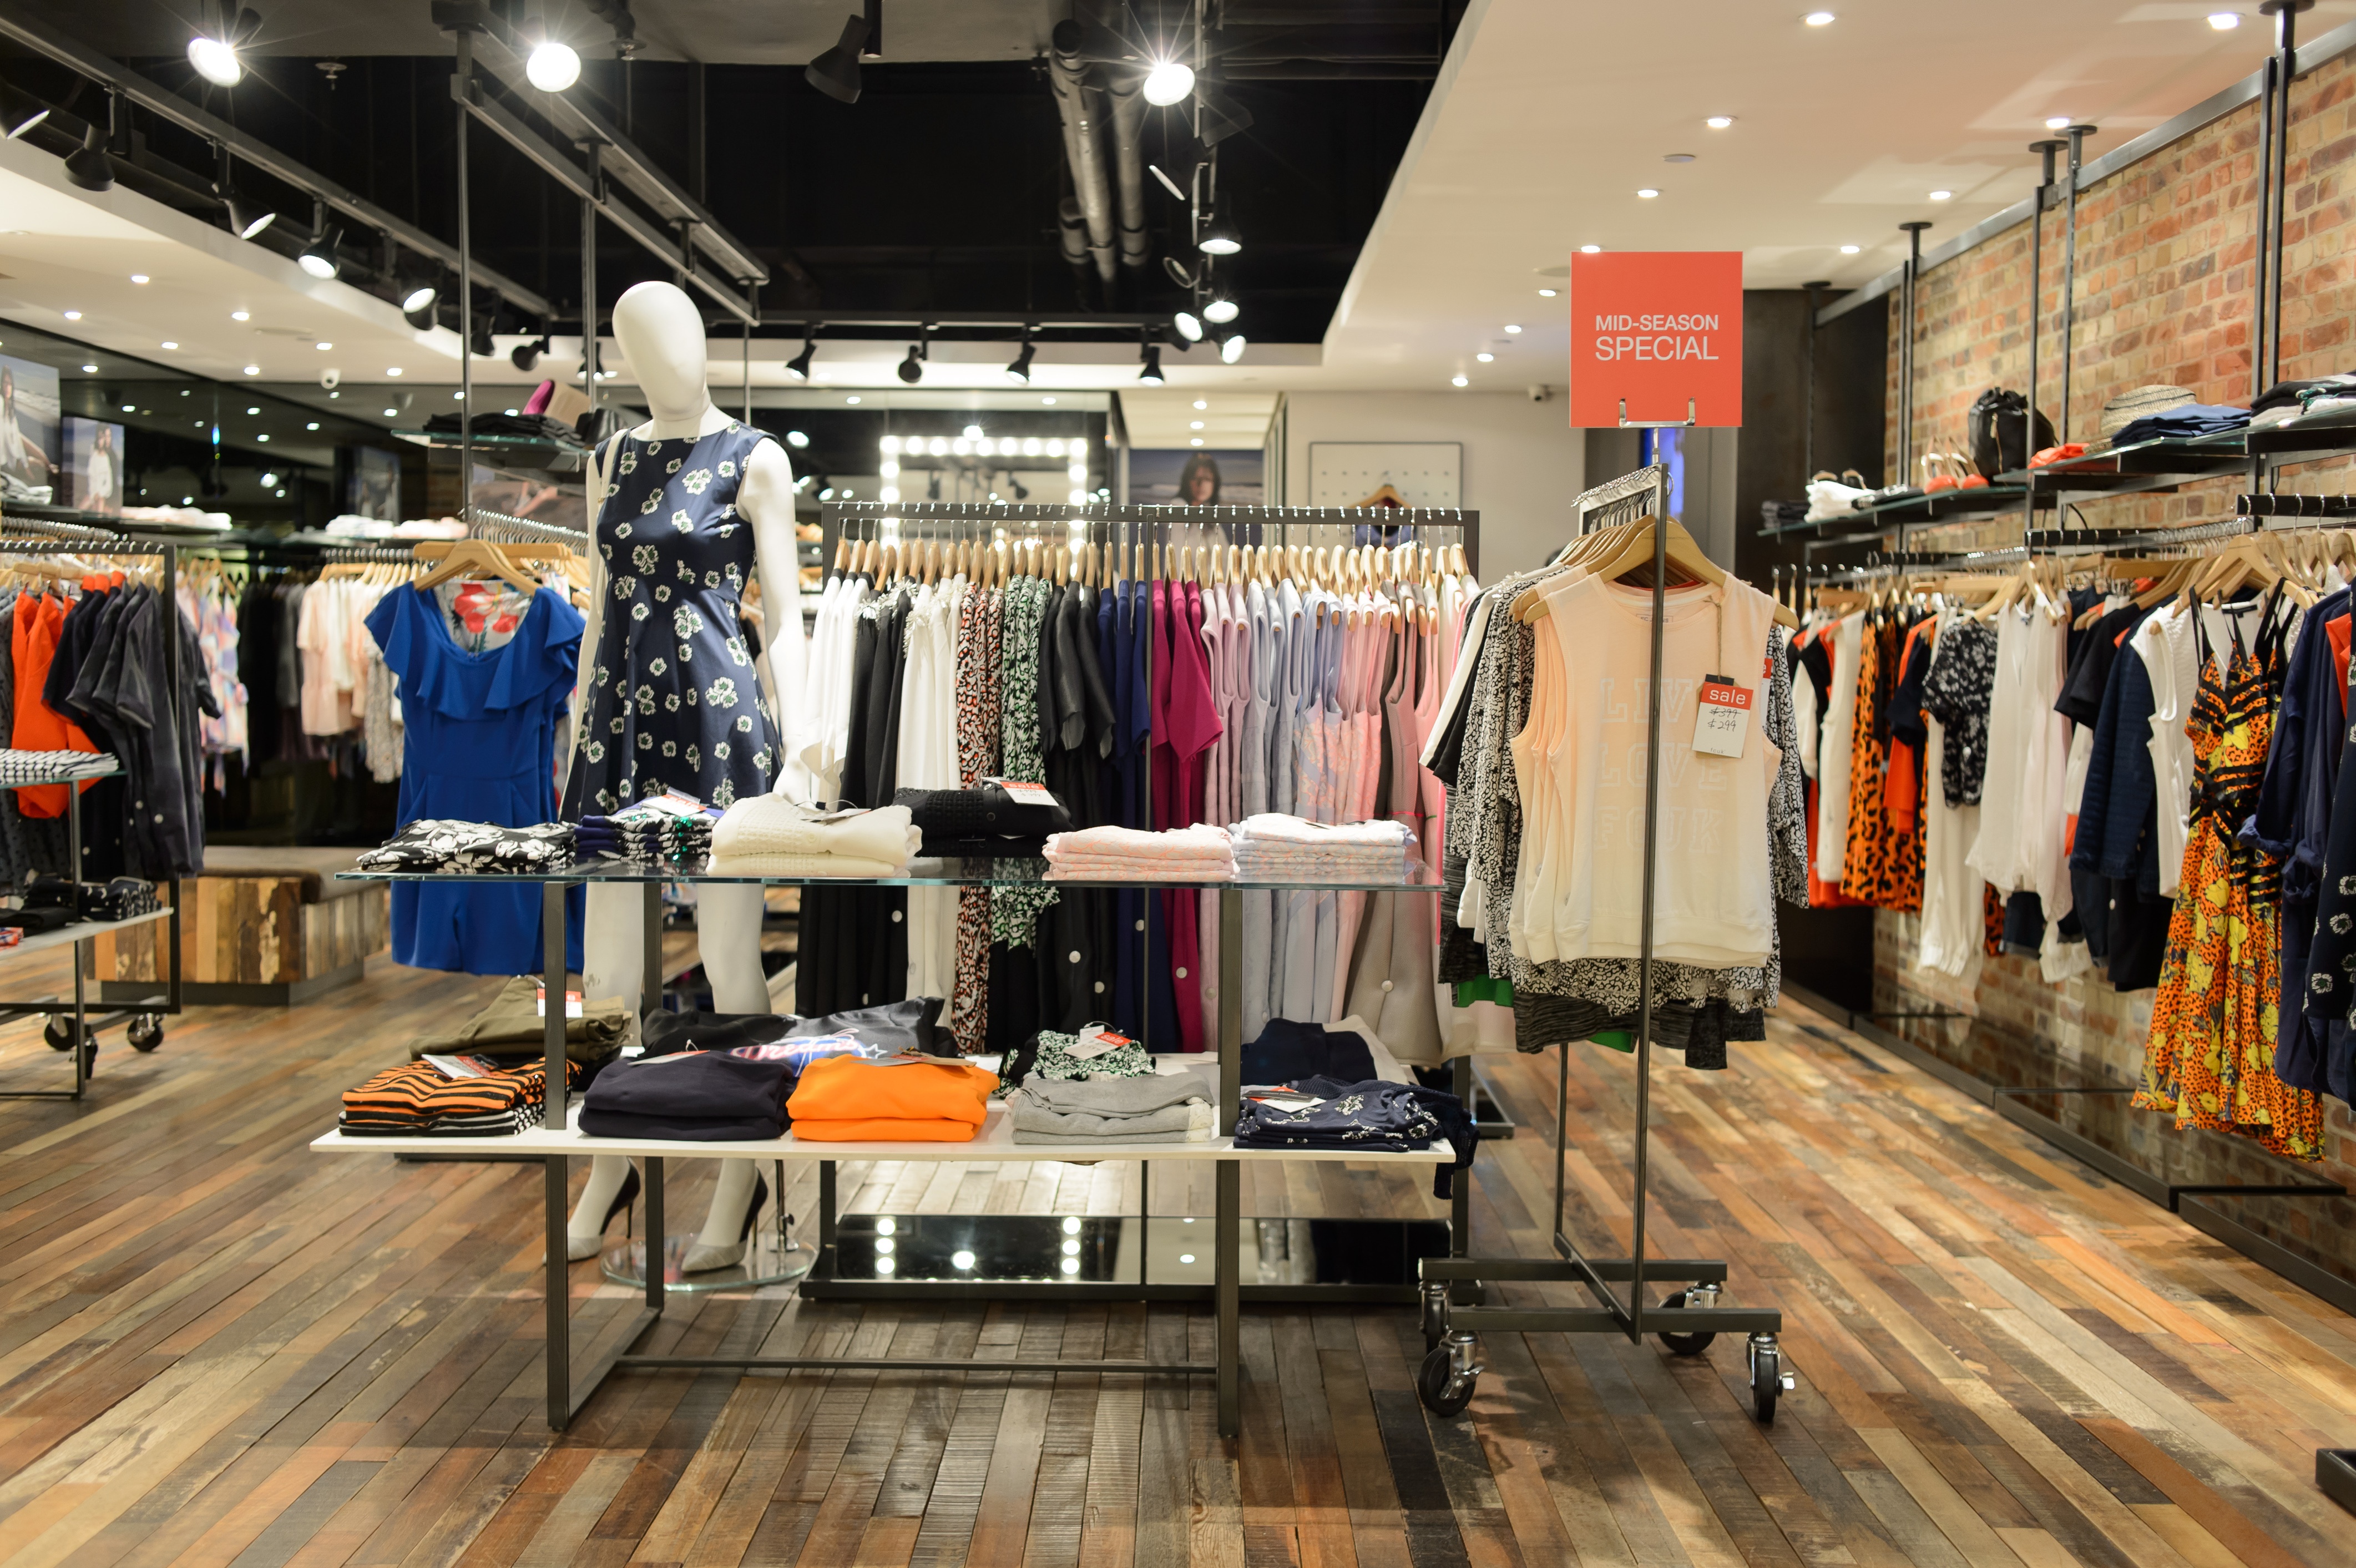 Retail Industry: Overview of the industry and why go digital.